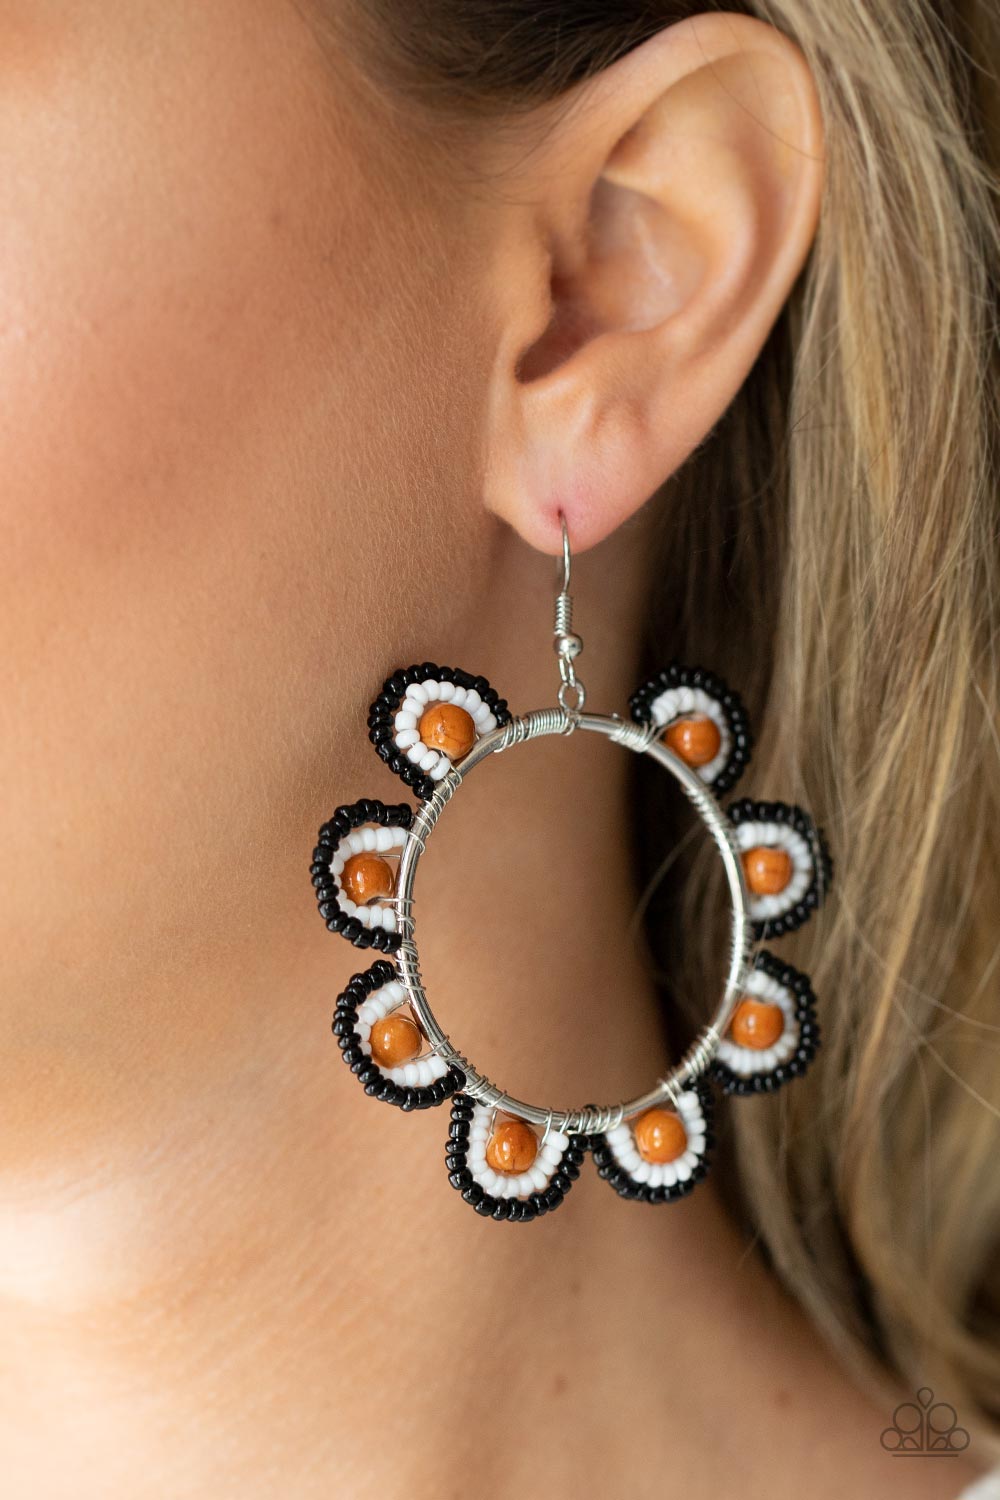 Groovy Gardens Brown Seed Bead Flower Earrings - Paparazzi Accessories- lightbox - CarasShop.com - $5 Jewelry by Cara Jewels